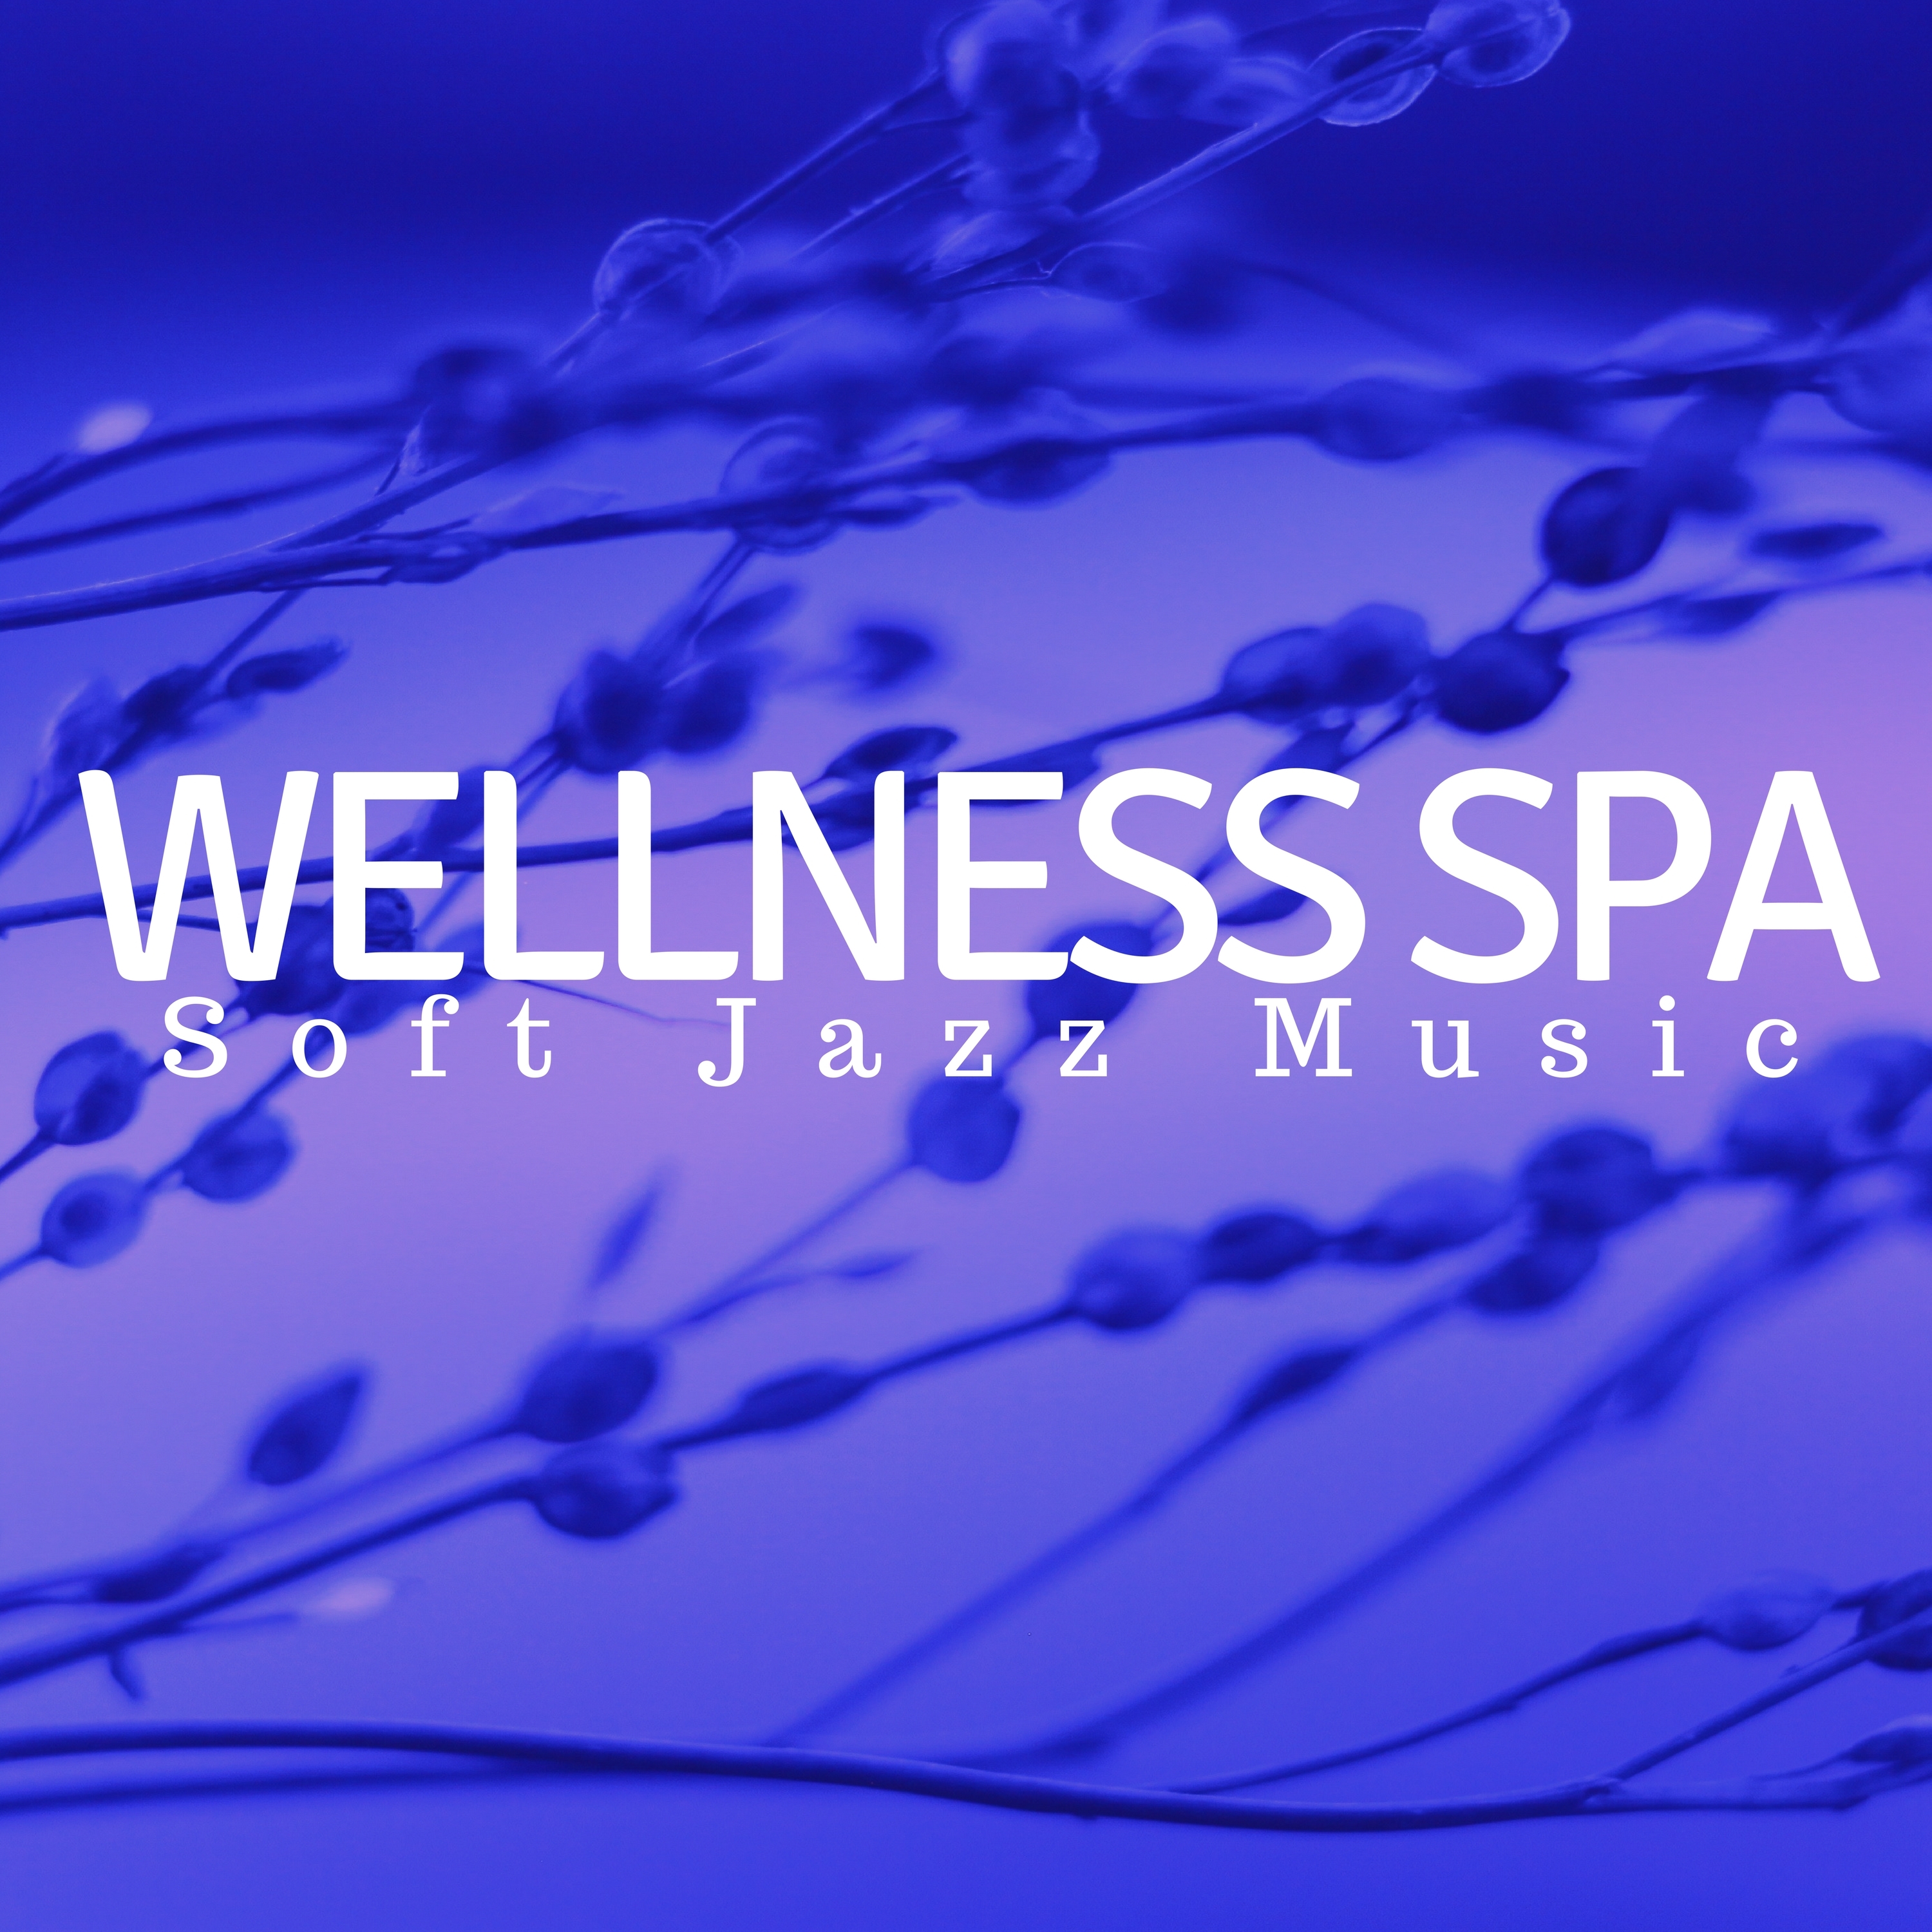 Wellness Spa - Soft Jazz Music, Contemporary Jazz Collection, Jazz Concert, Chillout Music